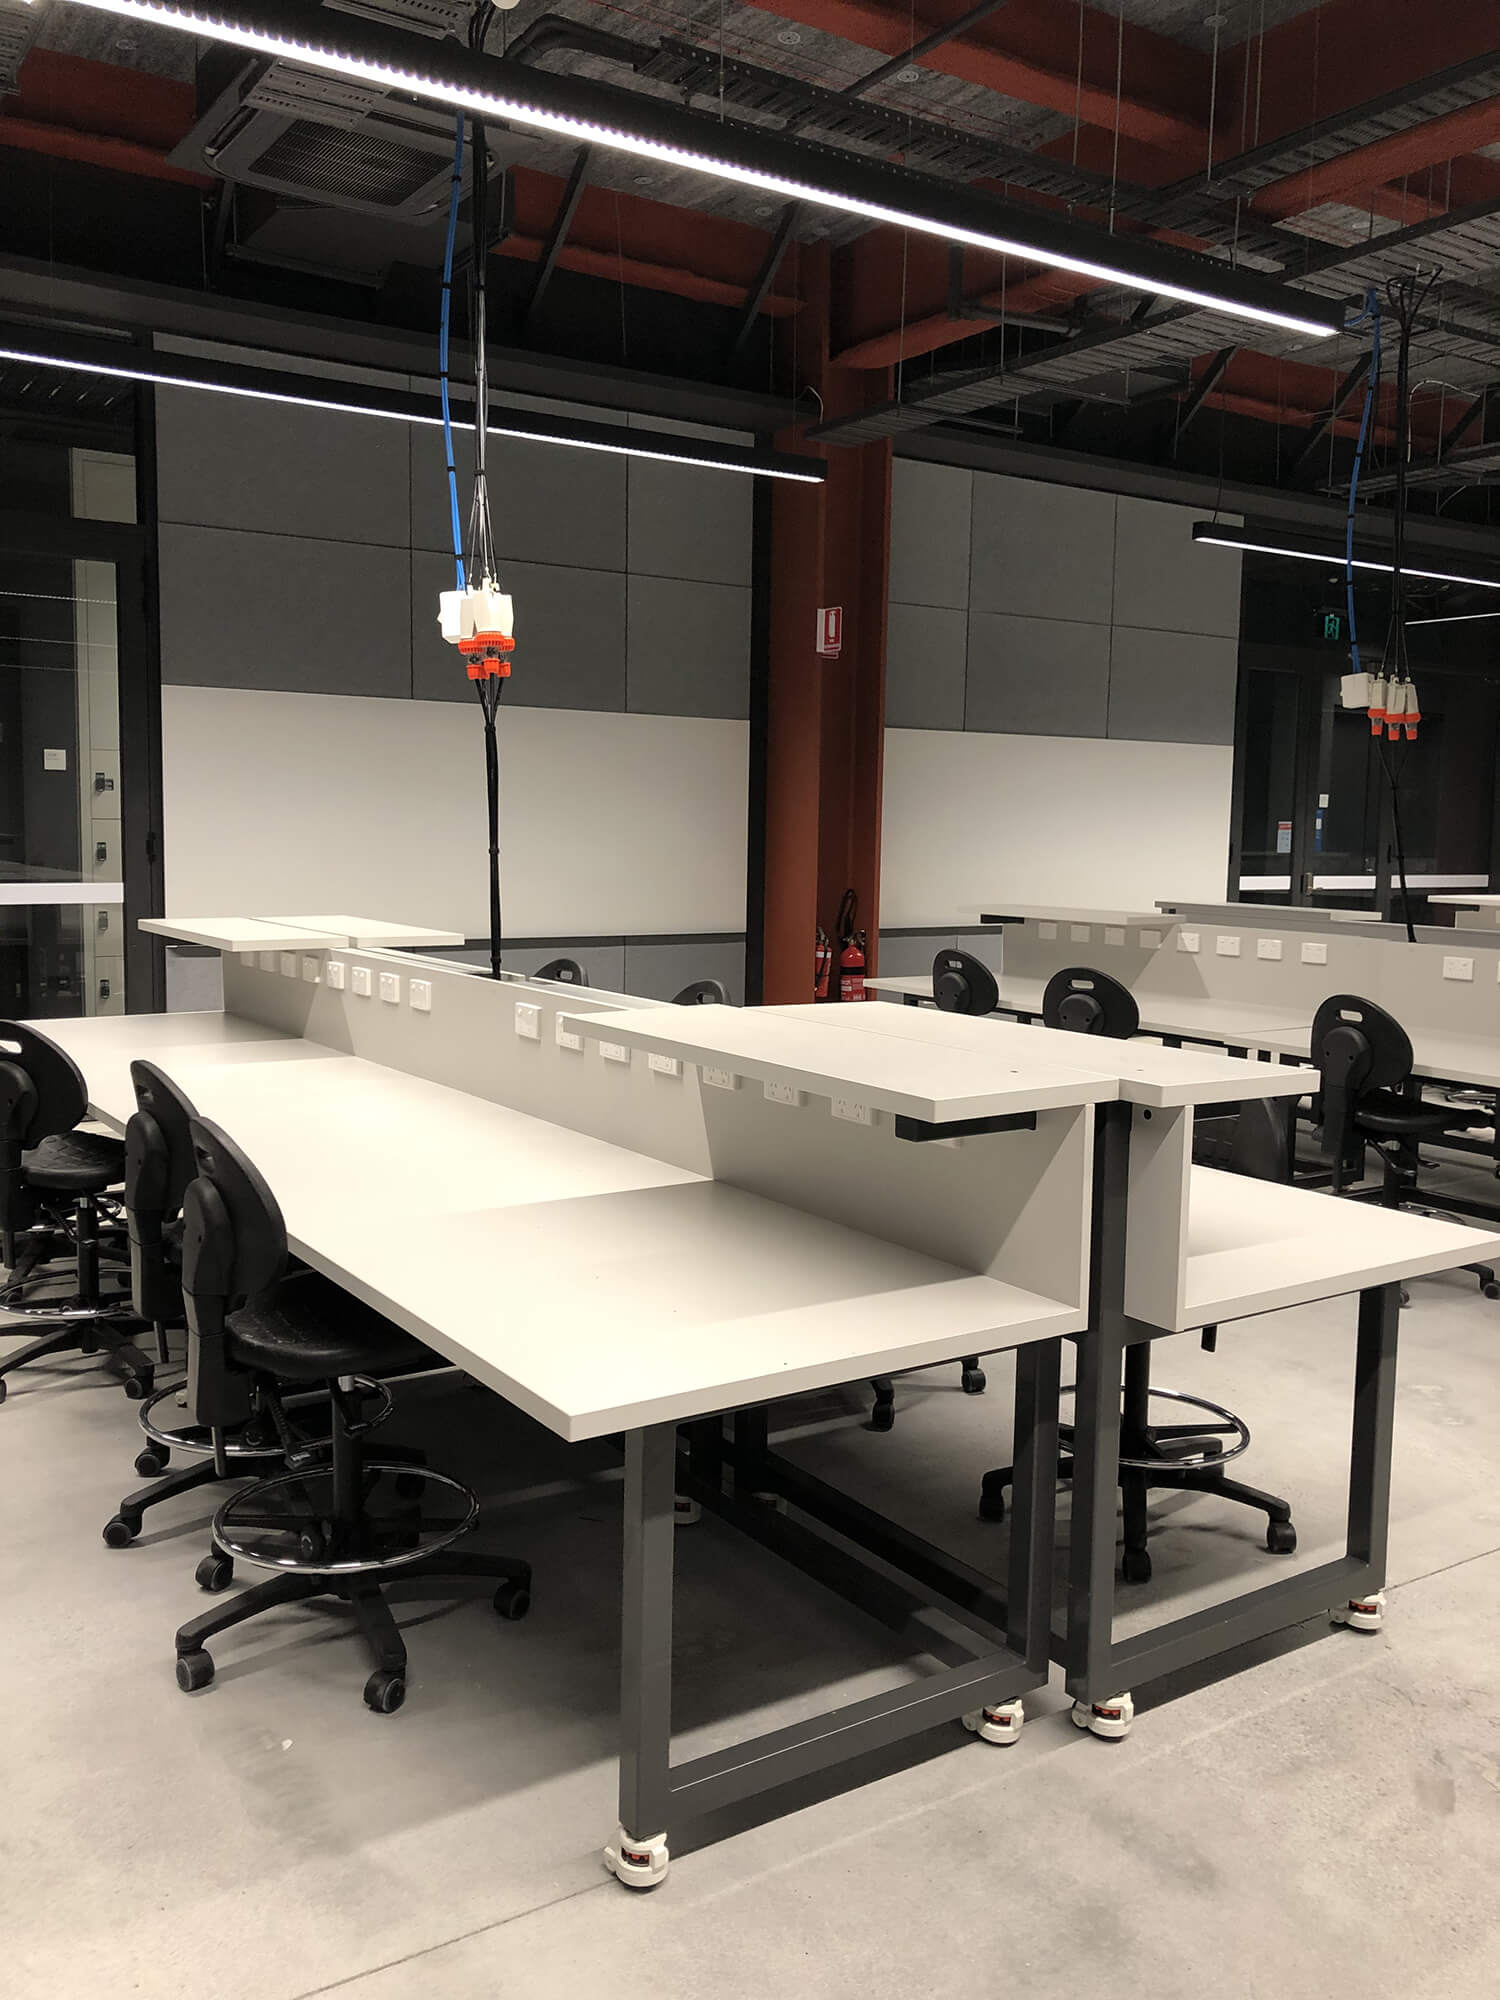 Electrical workbenches in learning laboratories